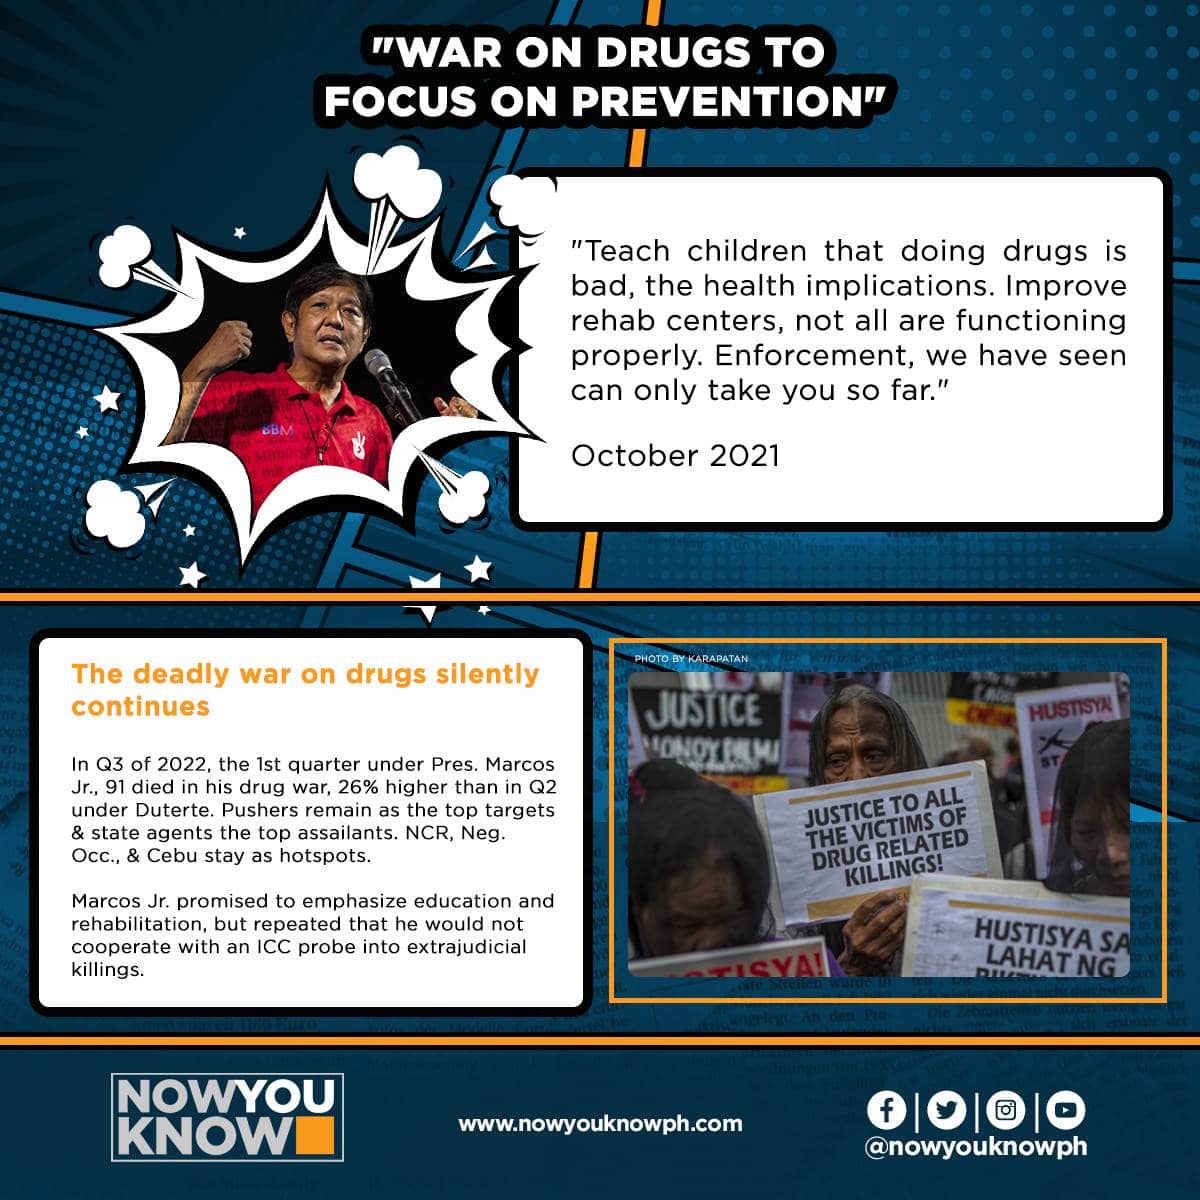 Compared to his predecessor Rodrigo Duterte, whose deadly anti-drug campaign claimed thousands of lives over his six years in power, Ferdinand Marcos Jr. has promised to take a less harsh approach to illegal drugs while campaigning for the presidency.